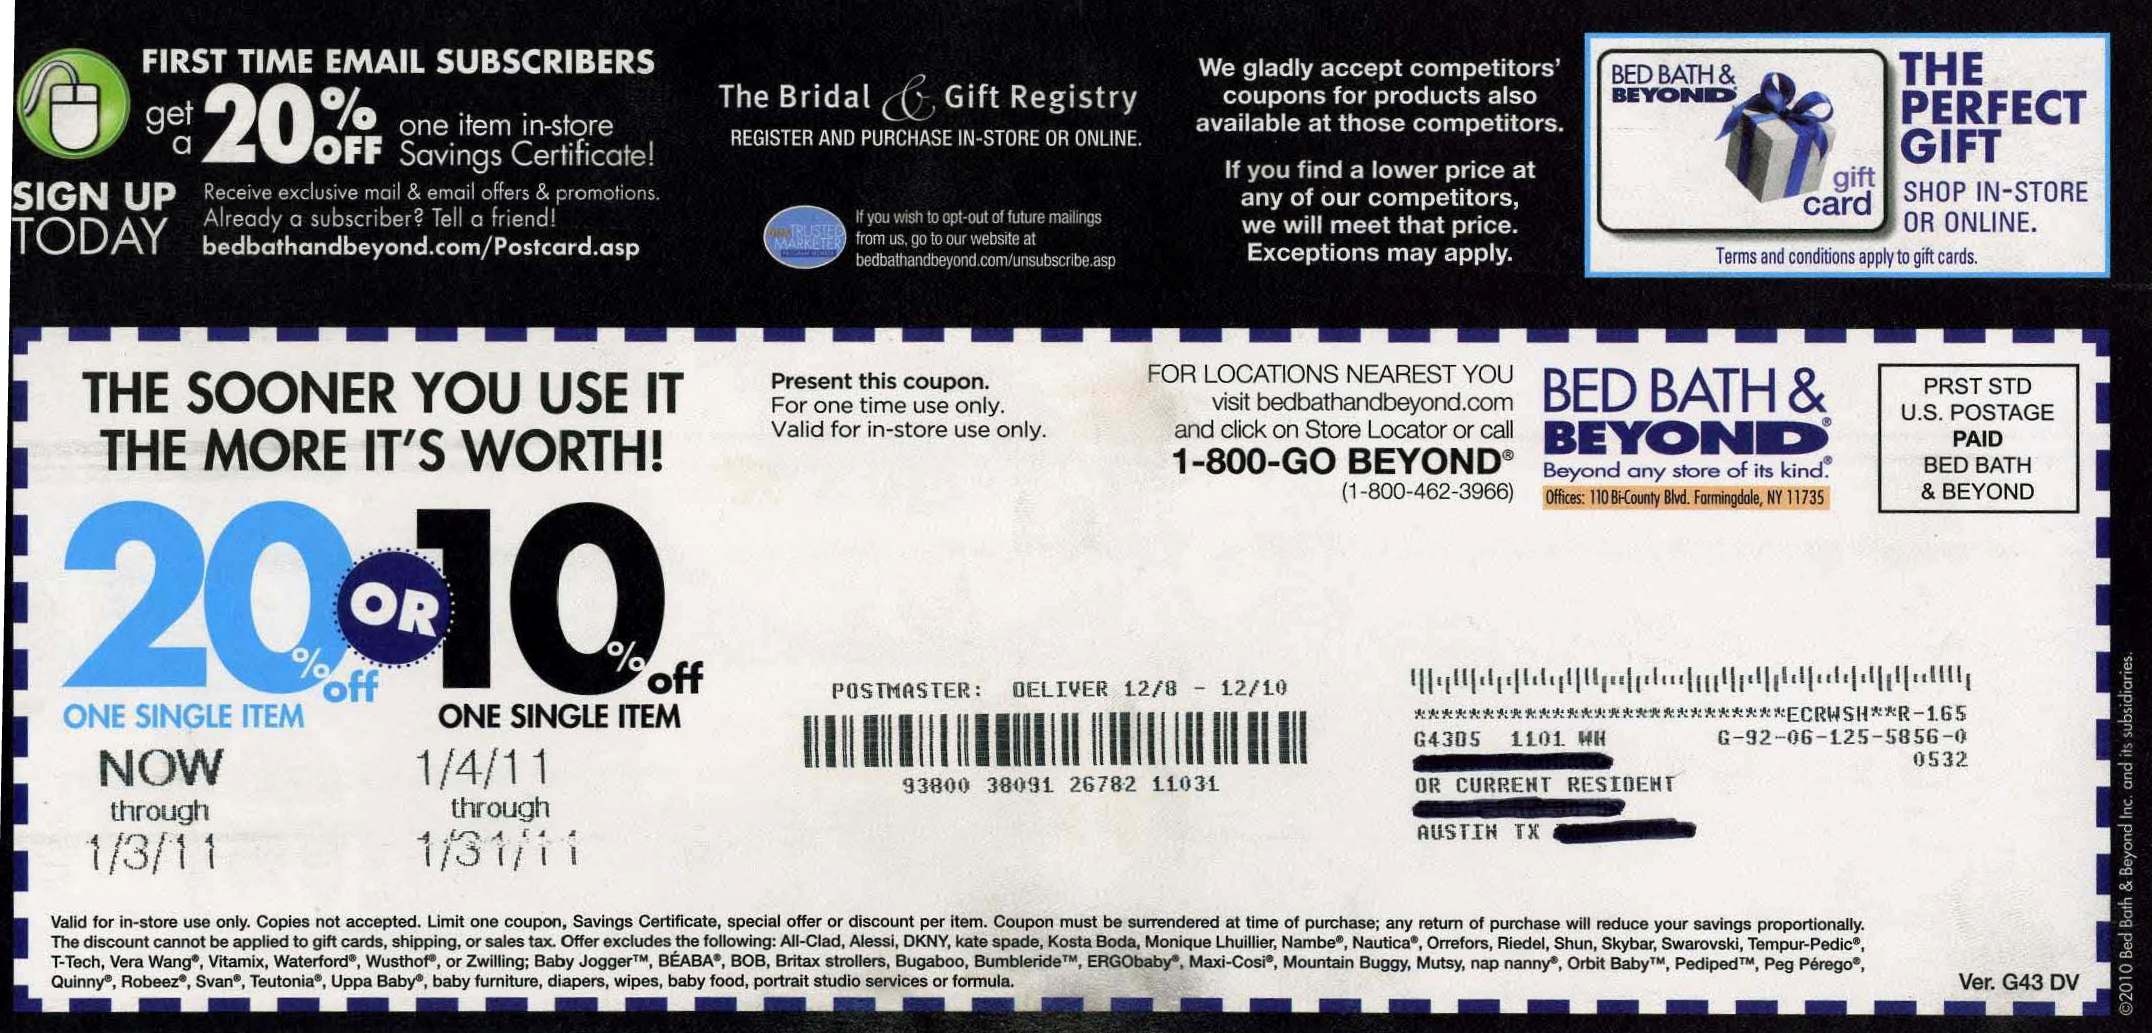 Bed Bath And Beyond Coupon 2018 : Galeton Gloves Coupon Code - Free Printable Bed Bath And Beyond 20 Off Coupon